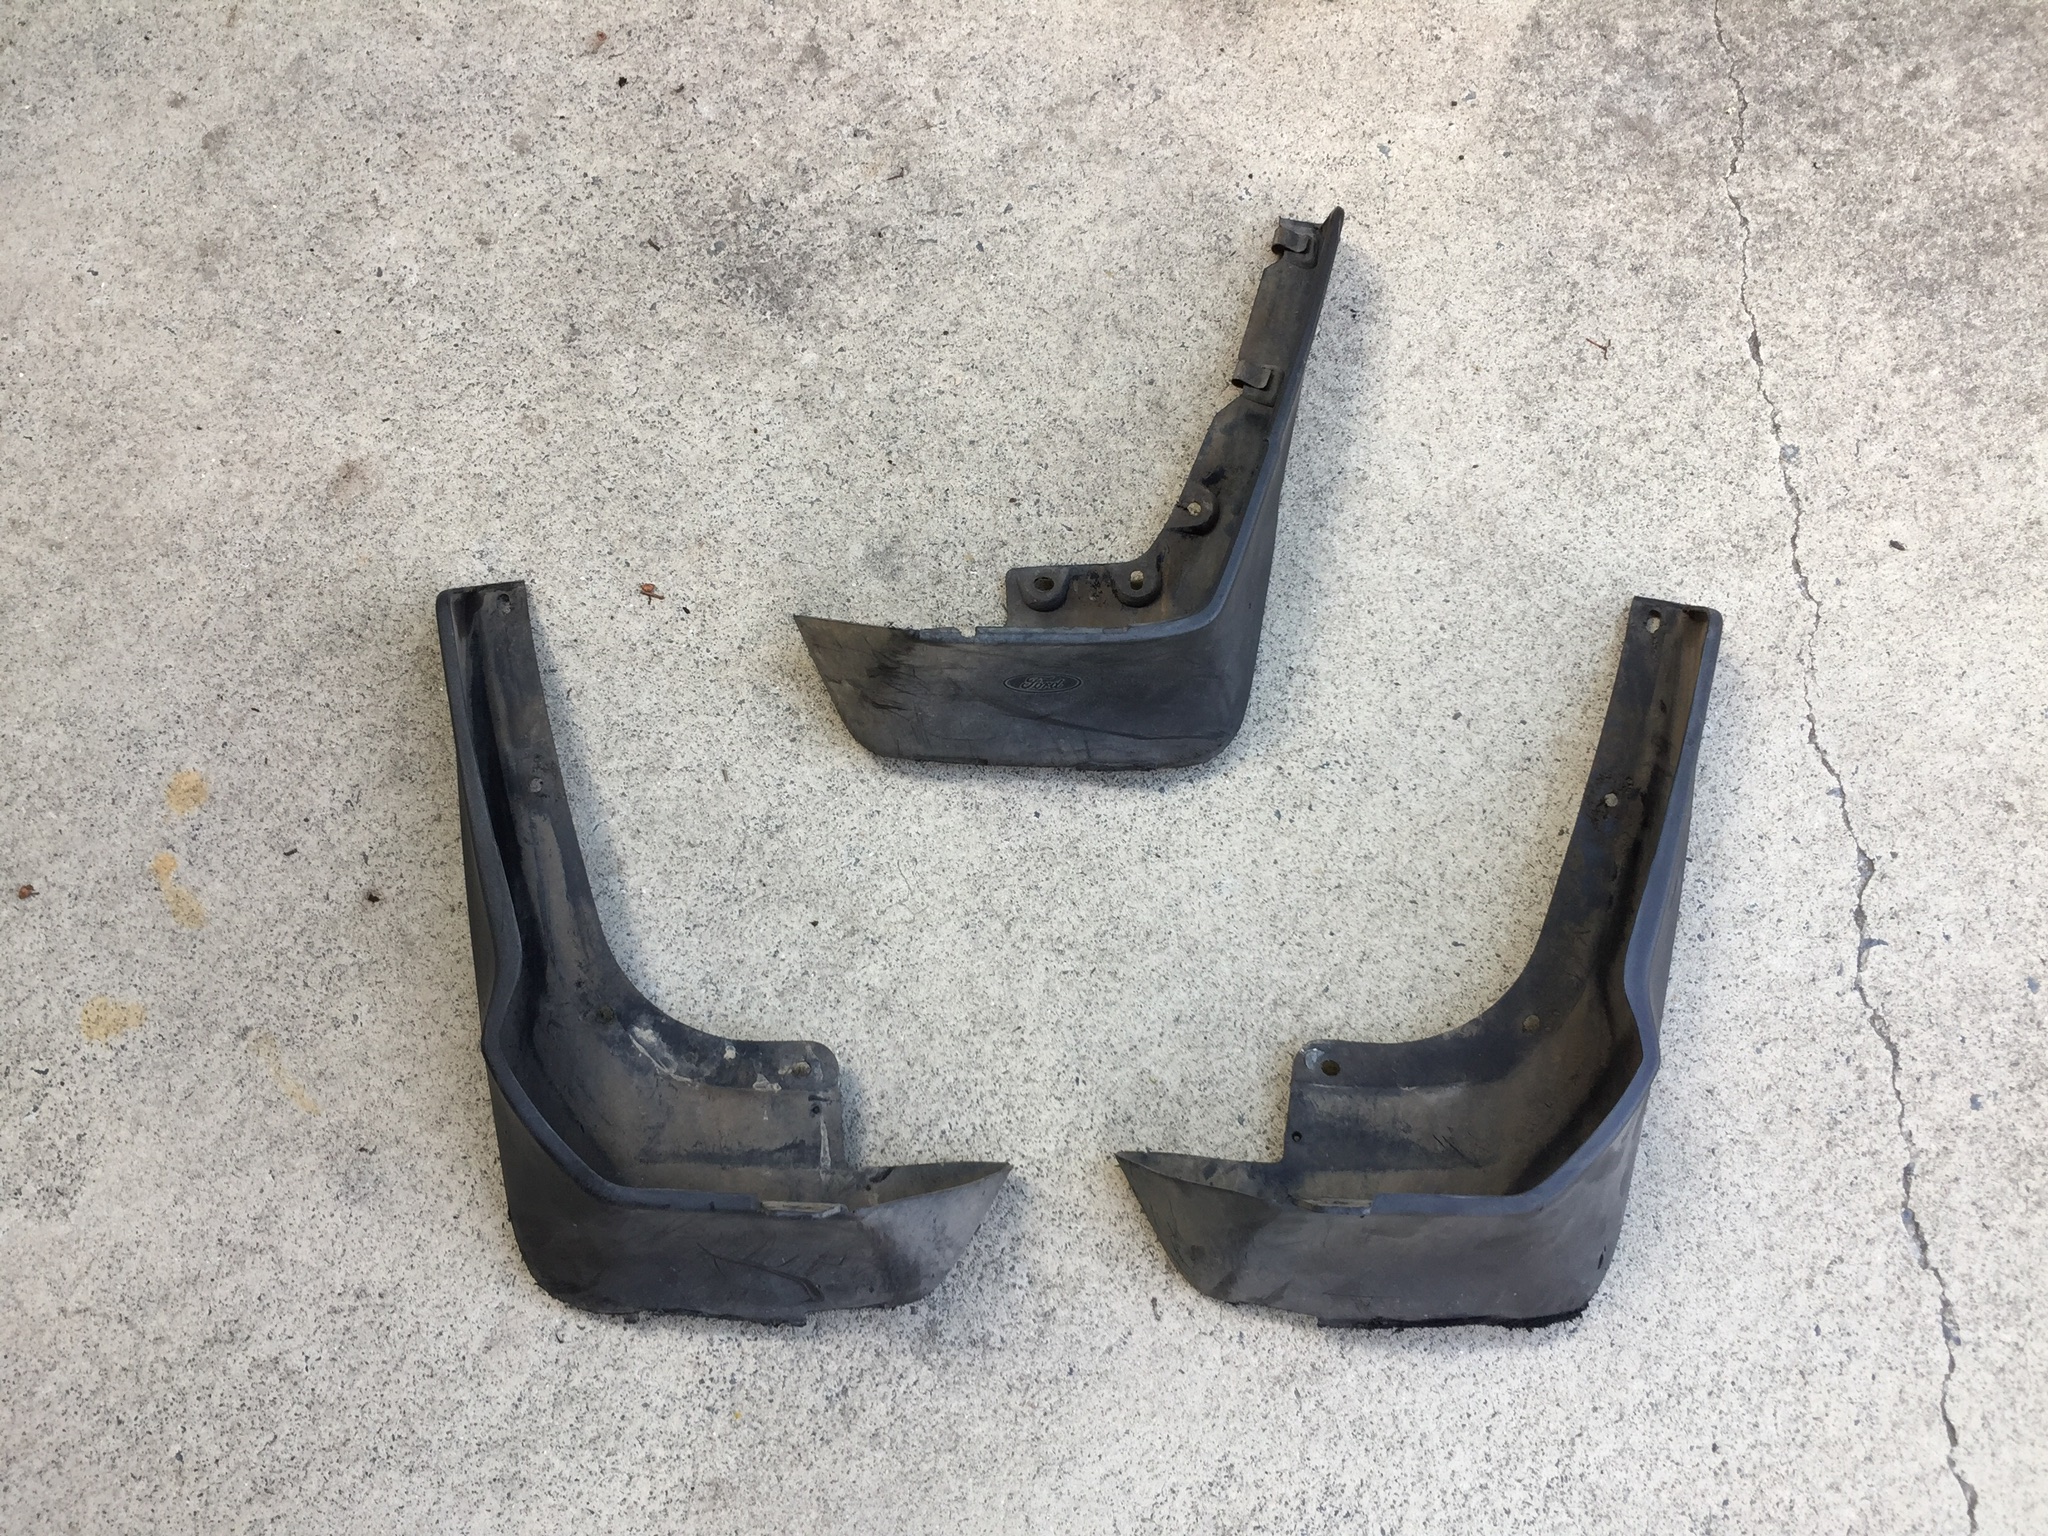 2008 - 2014 Ford Falcon FG Ute Parts! MUST Sell!